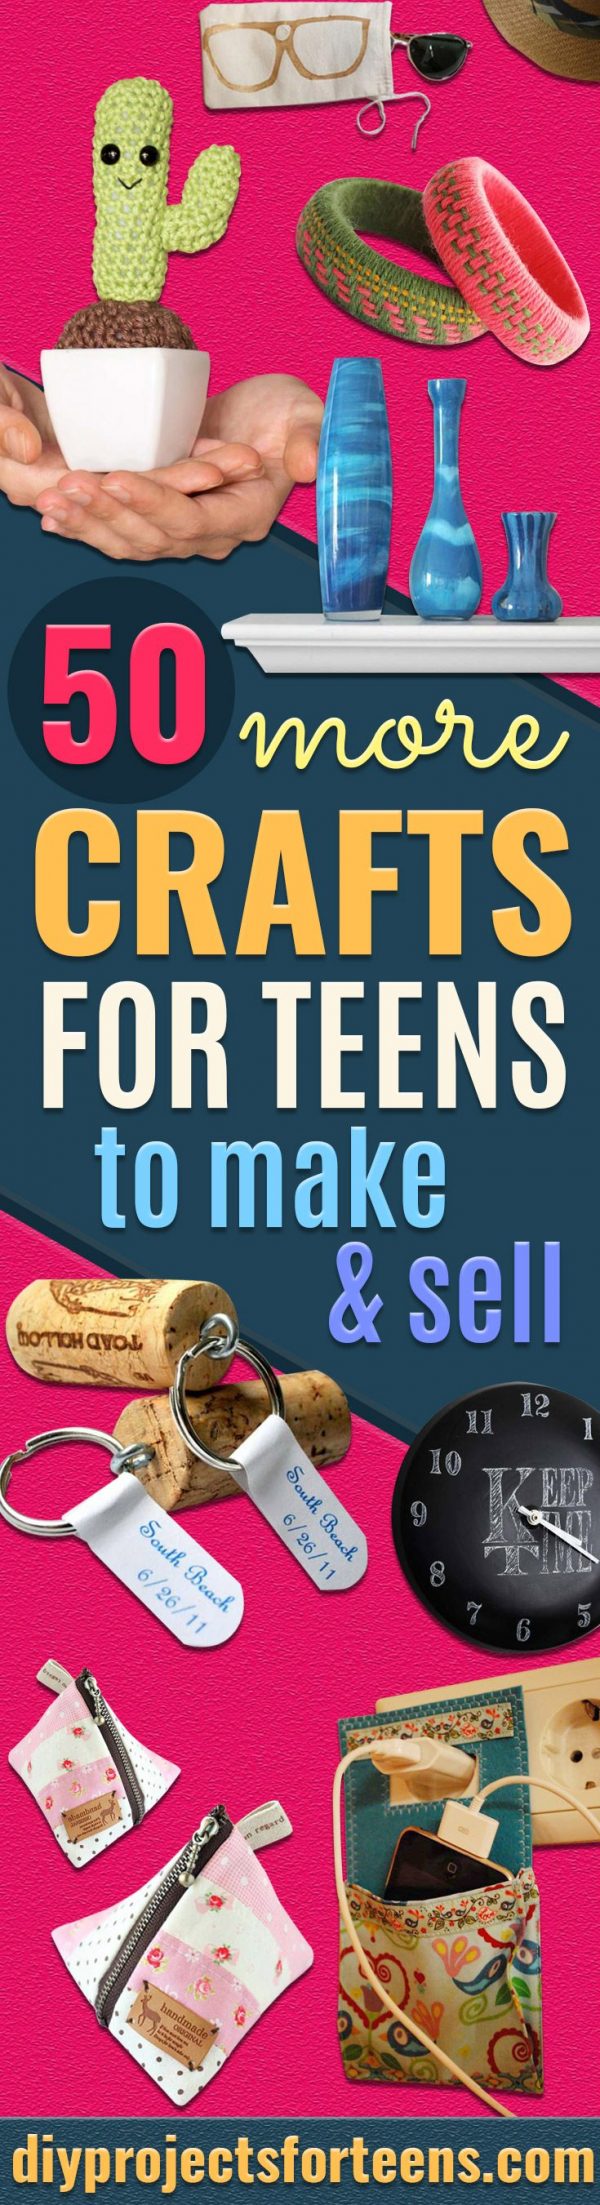 Teen Crafts to Make and Sell - Cheap and Easy Things to Sell for Money - Top Selling Craft Ideas to Put in An Etsy Shop - Popular Crafts for 2020 - ways for a Teen or Tween to make money from home 